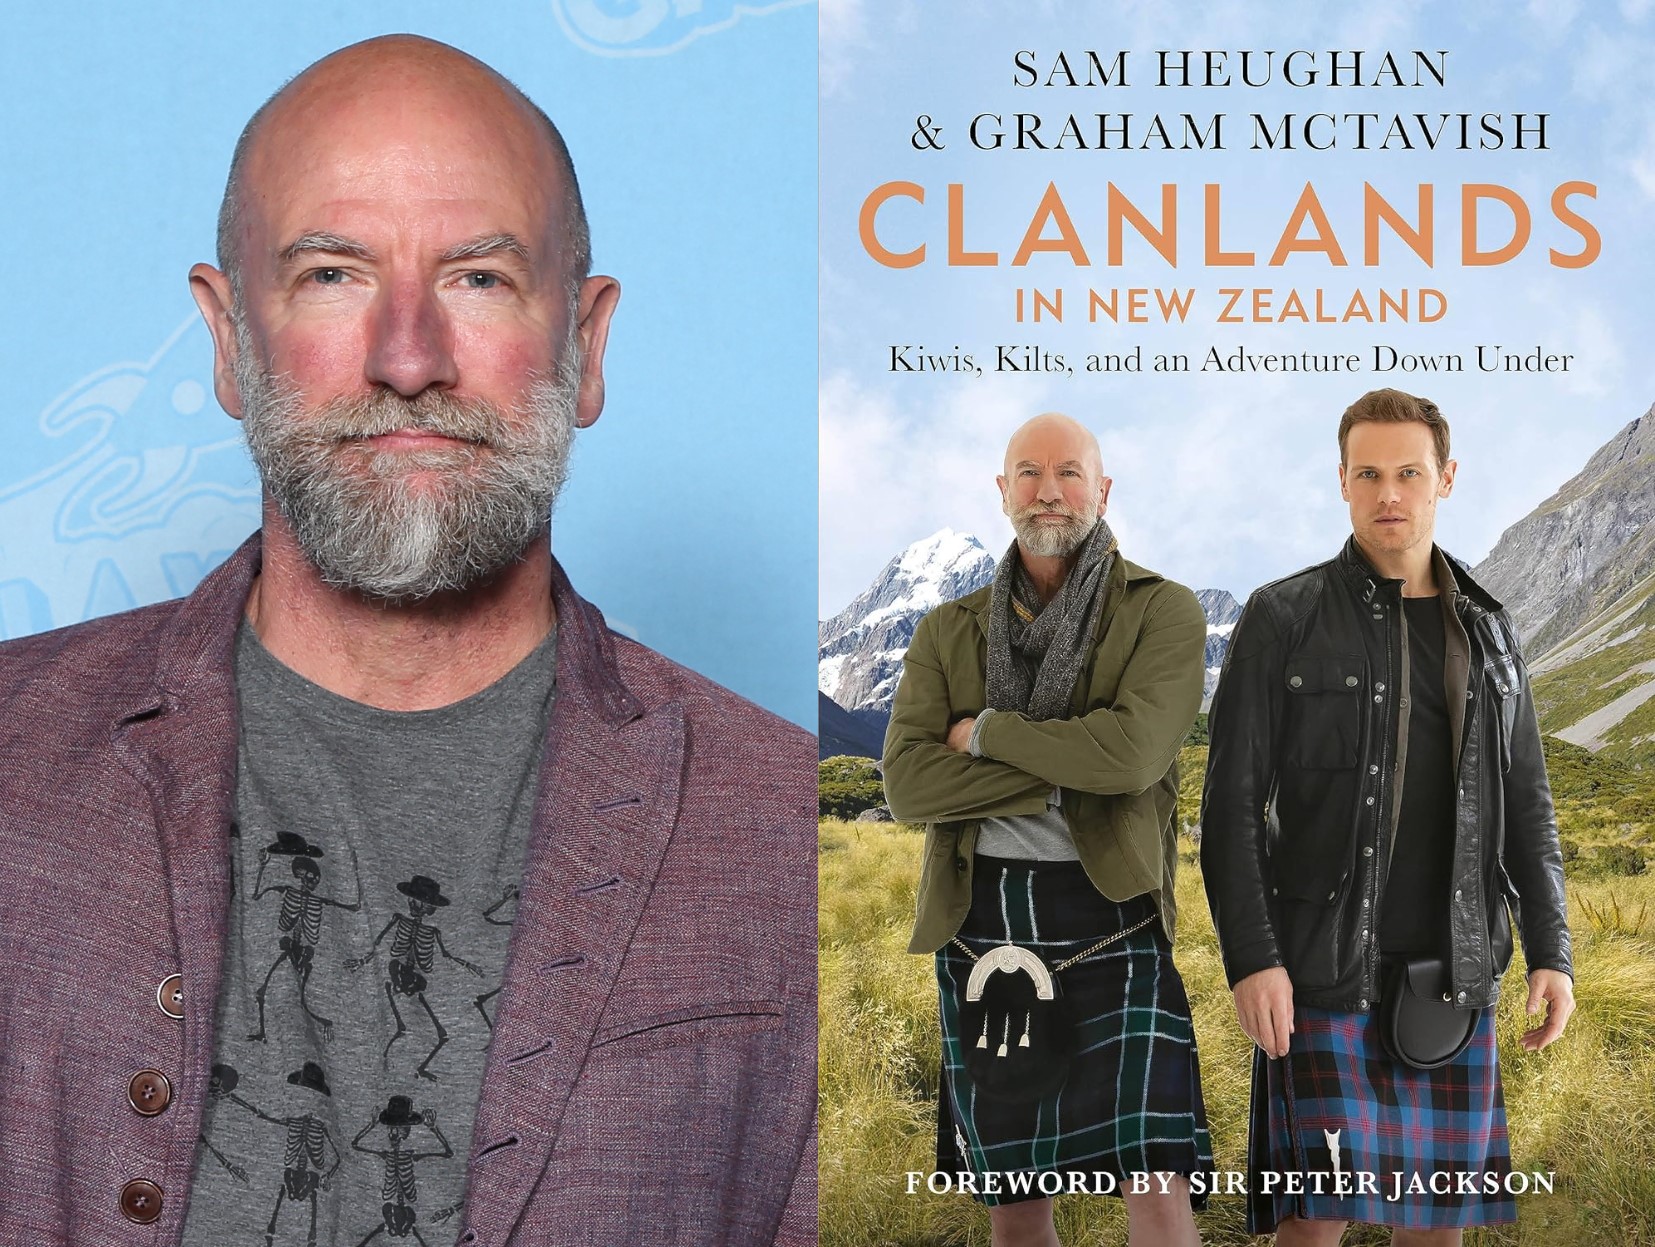 Actor Graham McTavish travels the world… and a little bit of Texas